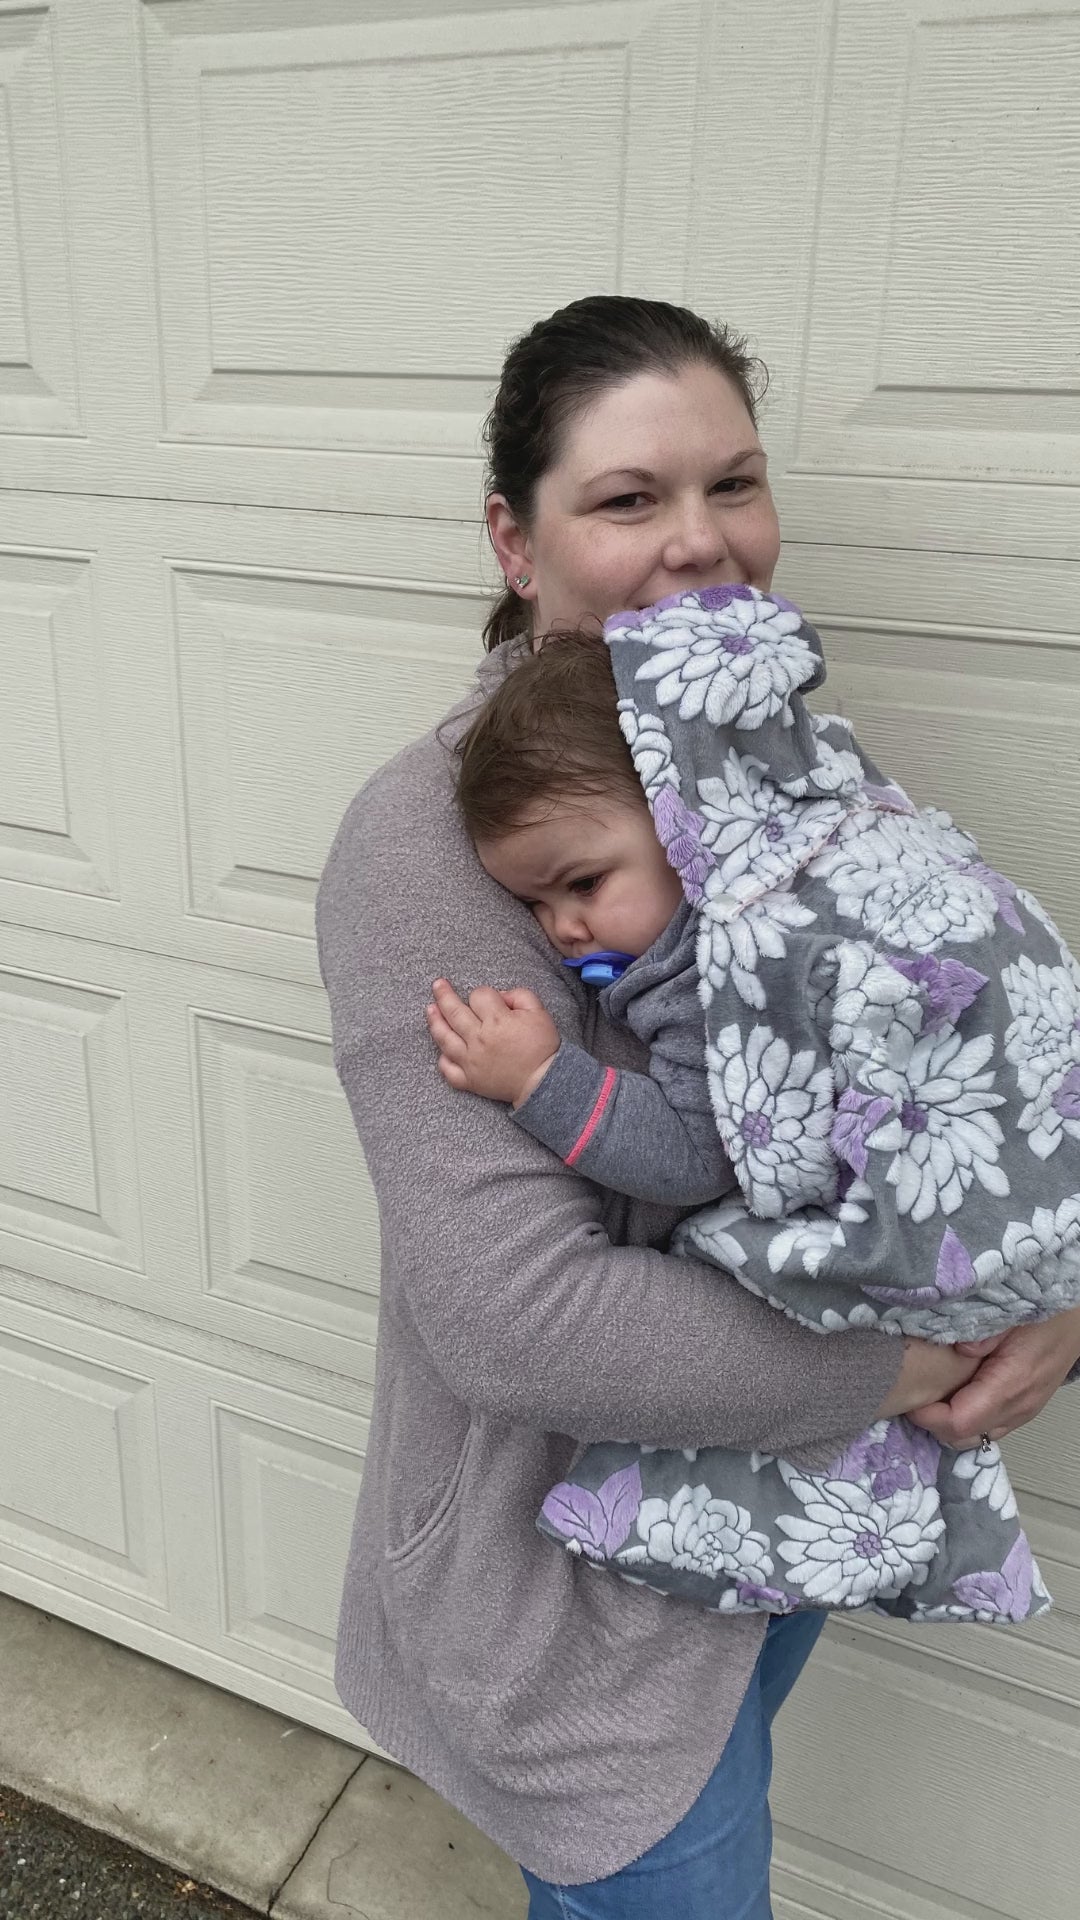 Car seat blanket, stroller blanket, baby carrier warmth, baby blanket, best baby gift, baby registry essentials, how to keep my baby warm in a car seat, how to keep my baby warm this winter.